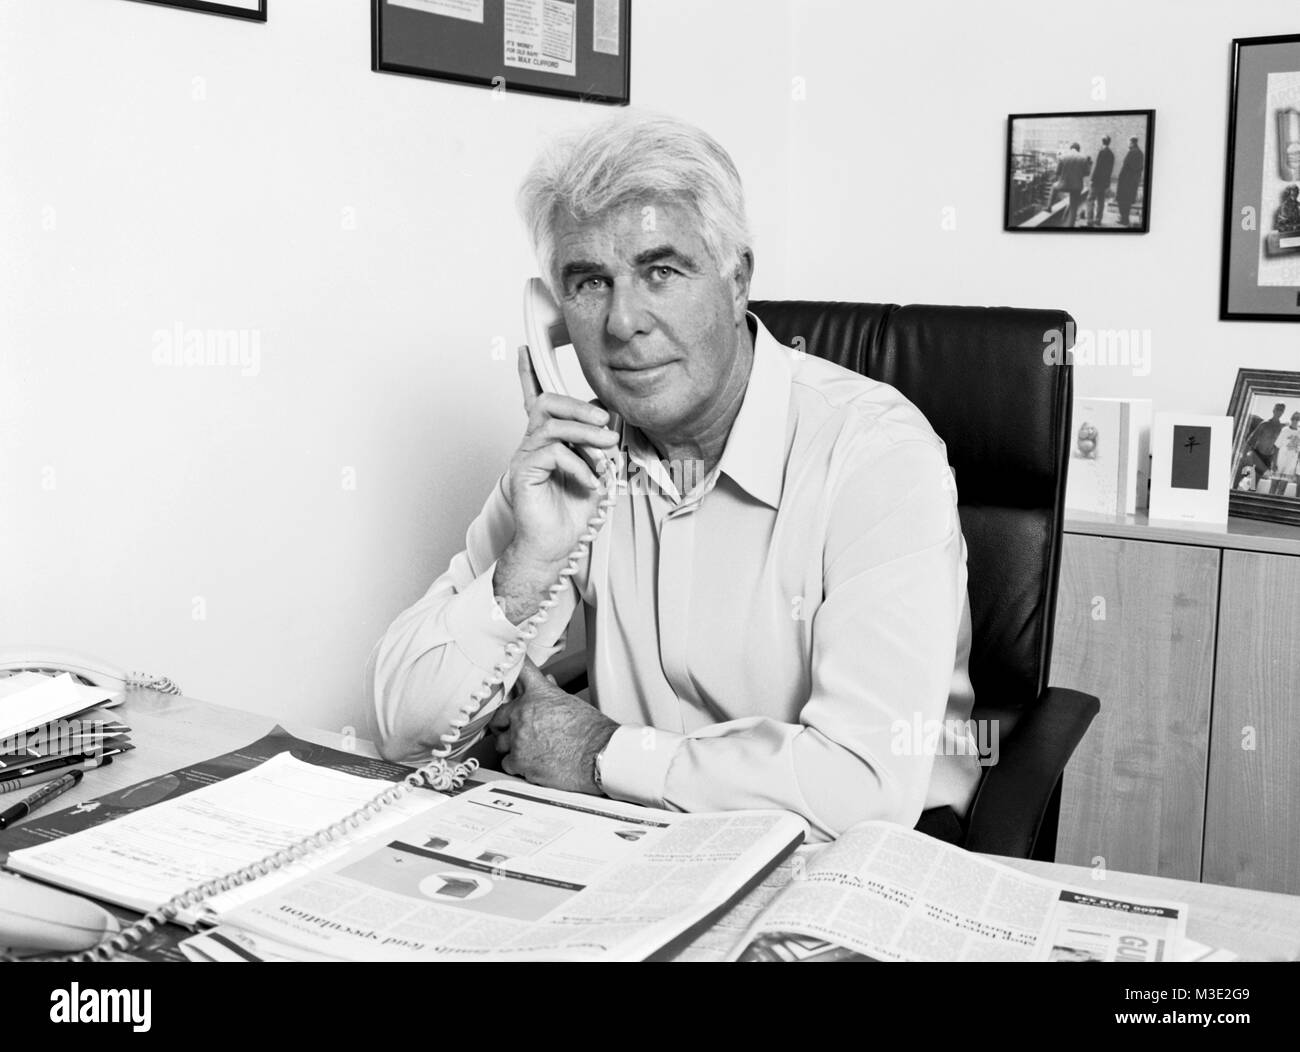 Portrait of Max Clifford English publicist  famous for his 'kiss-and-tell' stories to tabloid newspapers. Photographed in his office 2004, London, England, United Kingdom. Stock Photo